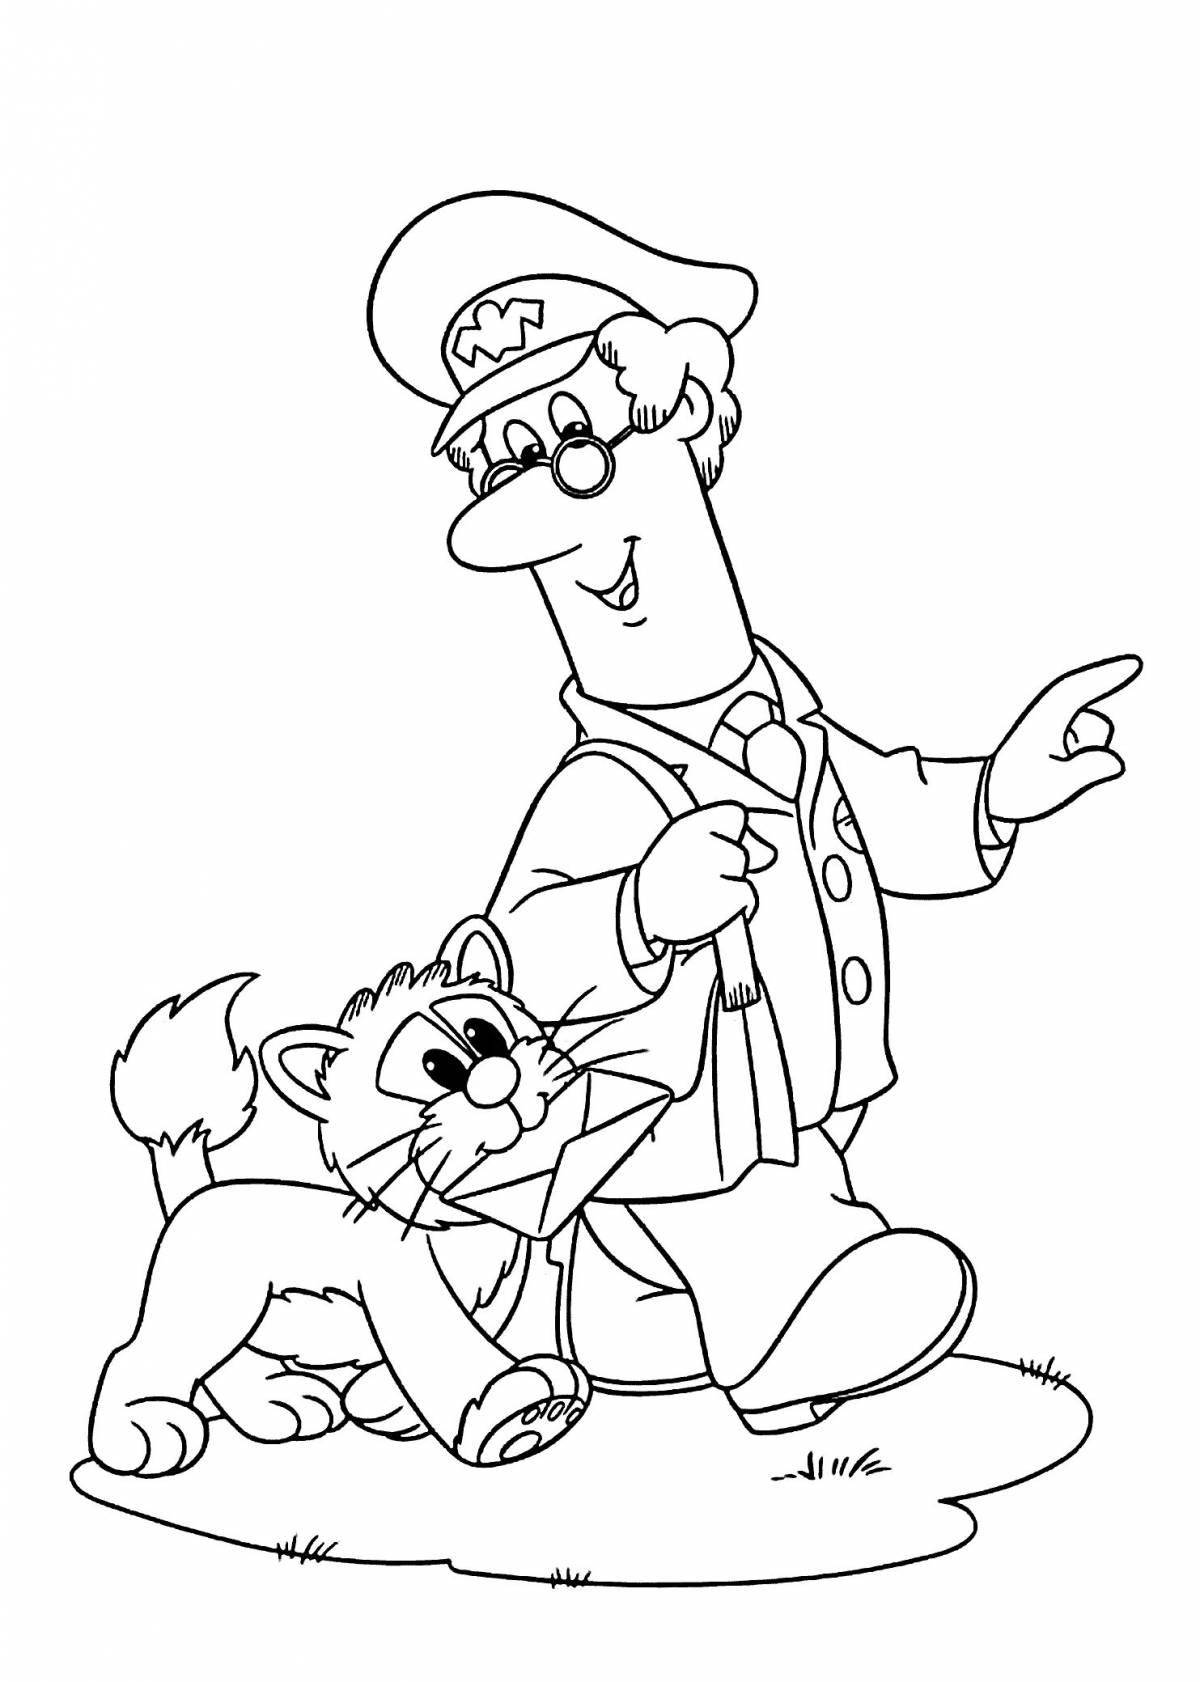 Coloring page charming Pechkin